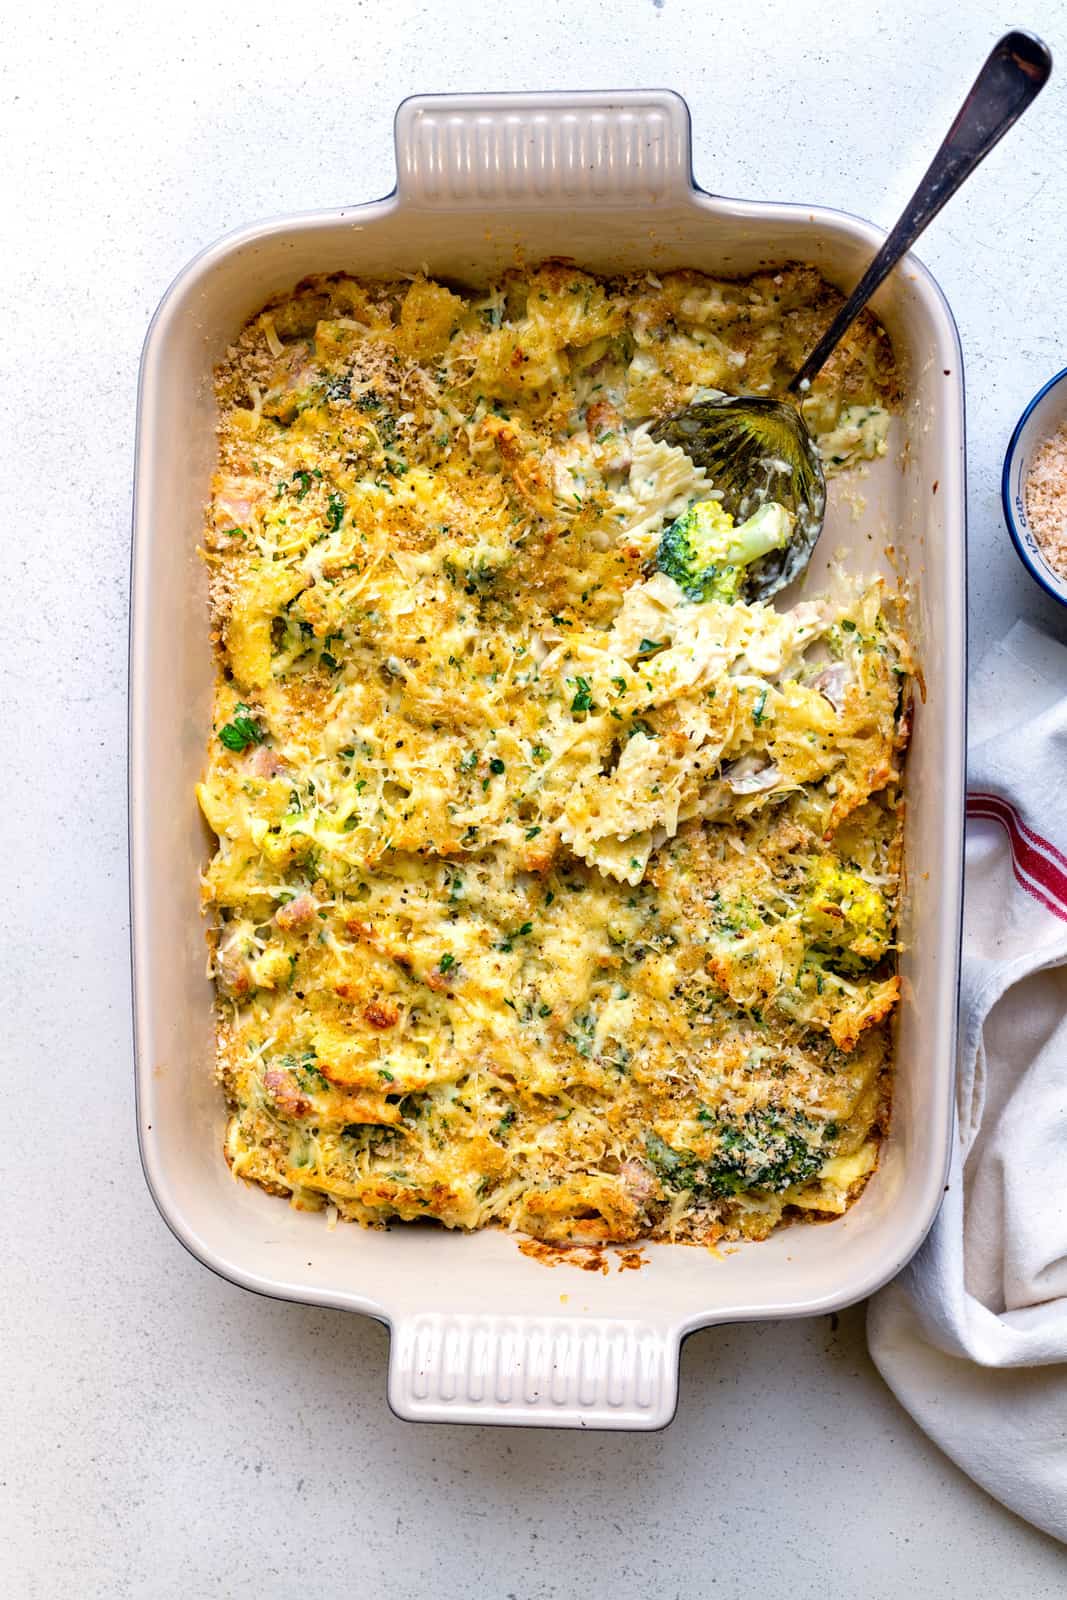 Leftover turkey casserole with broccoli, pasta and creamy sauce baked in oven